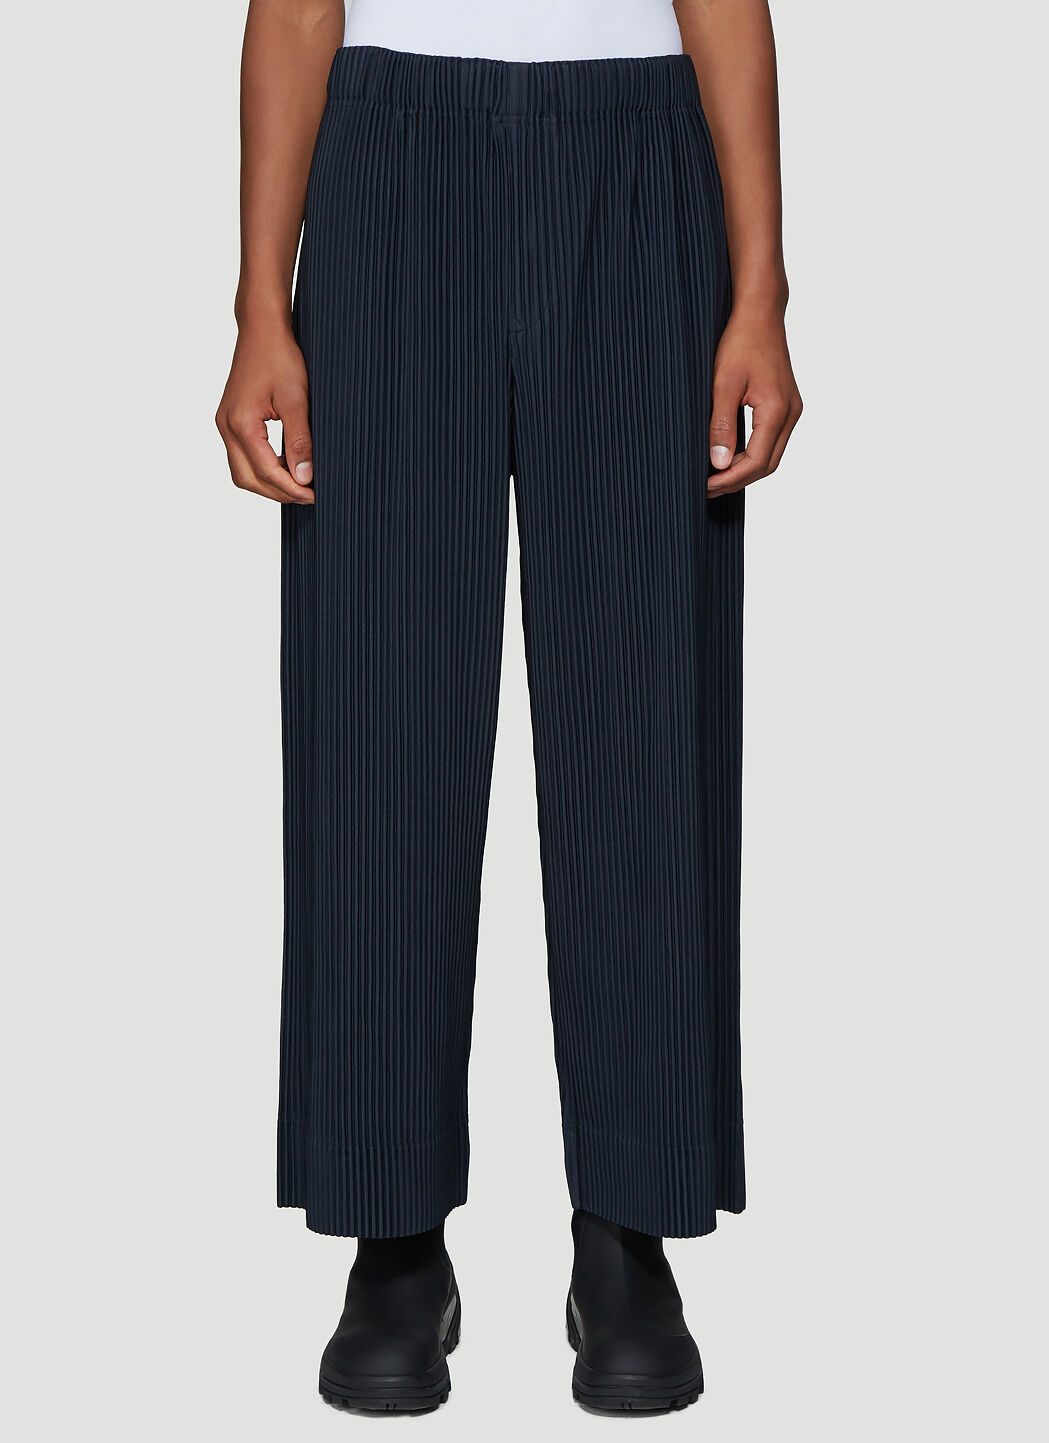 FINE KNIT PLEATS BLACK PANTS | The official ISSEY MIYAKE ONLINE STORE | ISSEY  MIYAKE USA